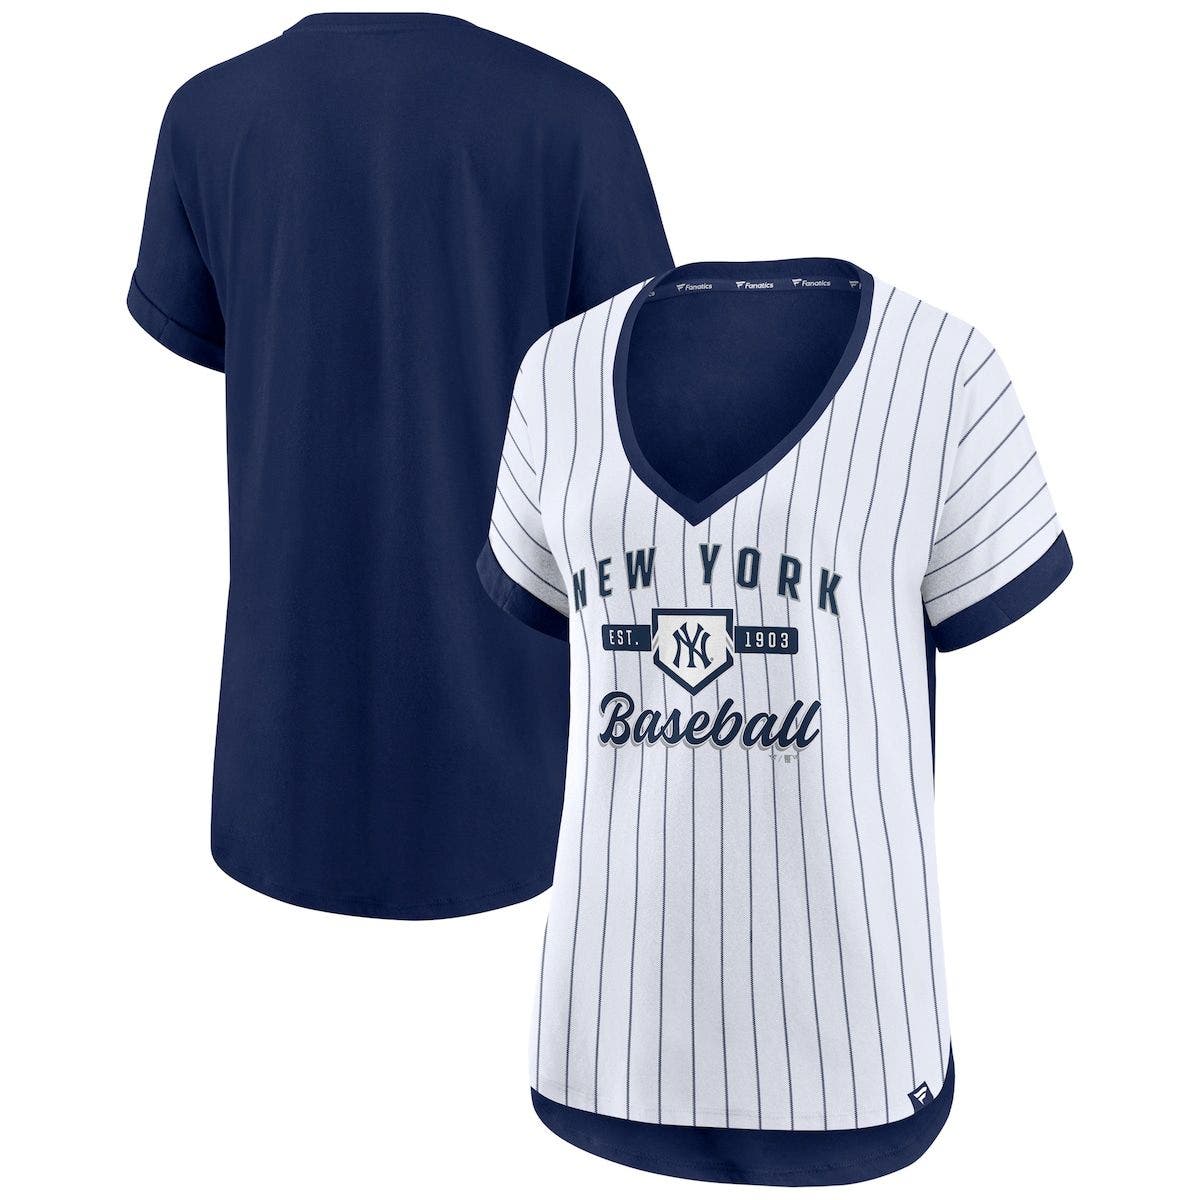 Iconic Supporters Cotton Jersey Shirt New York Yankees 